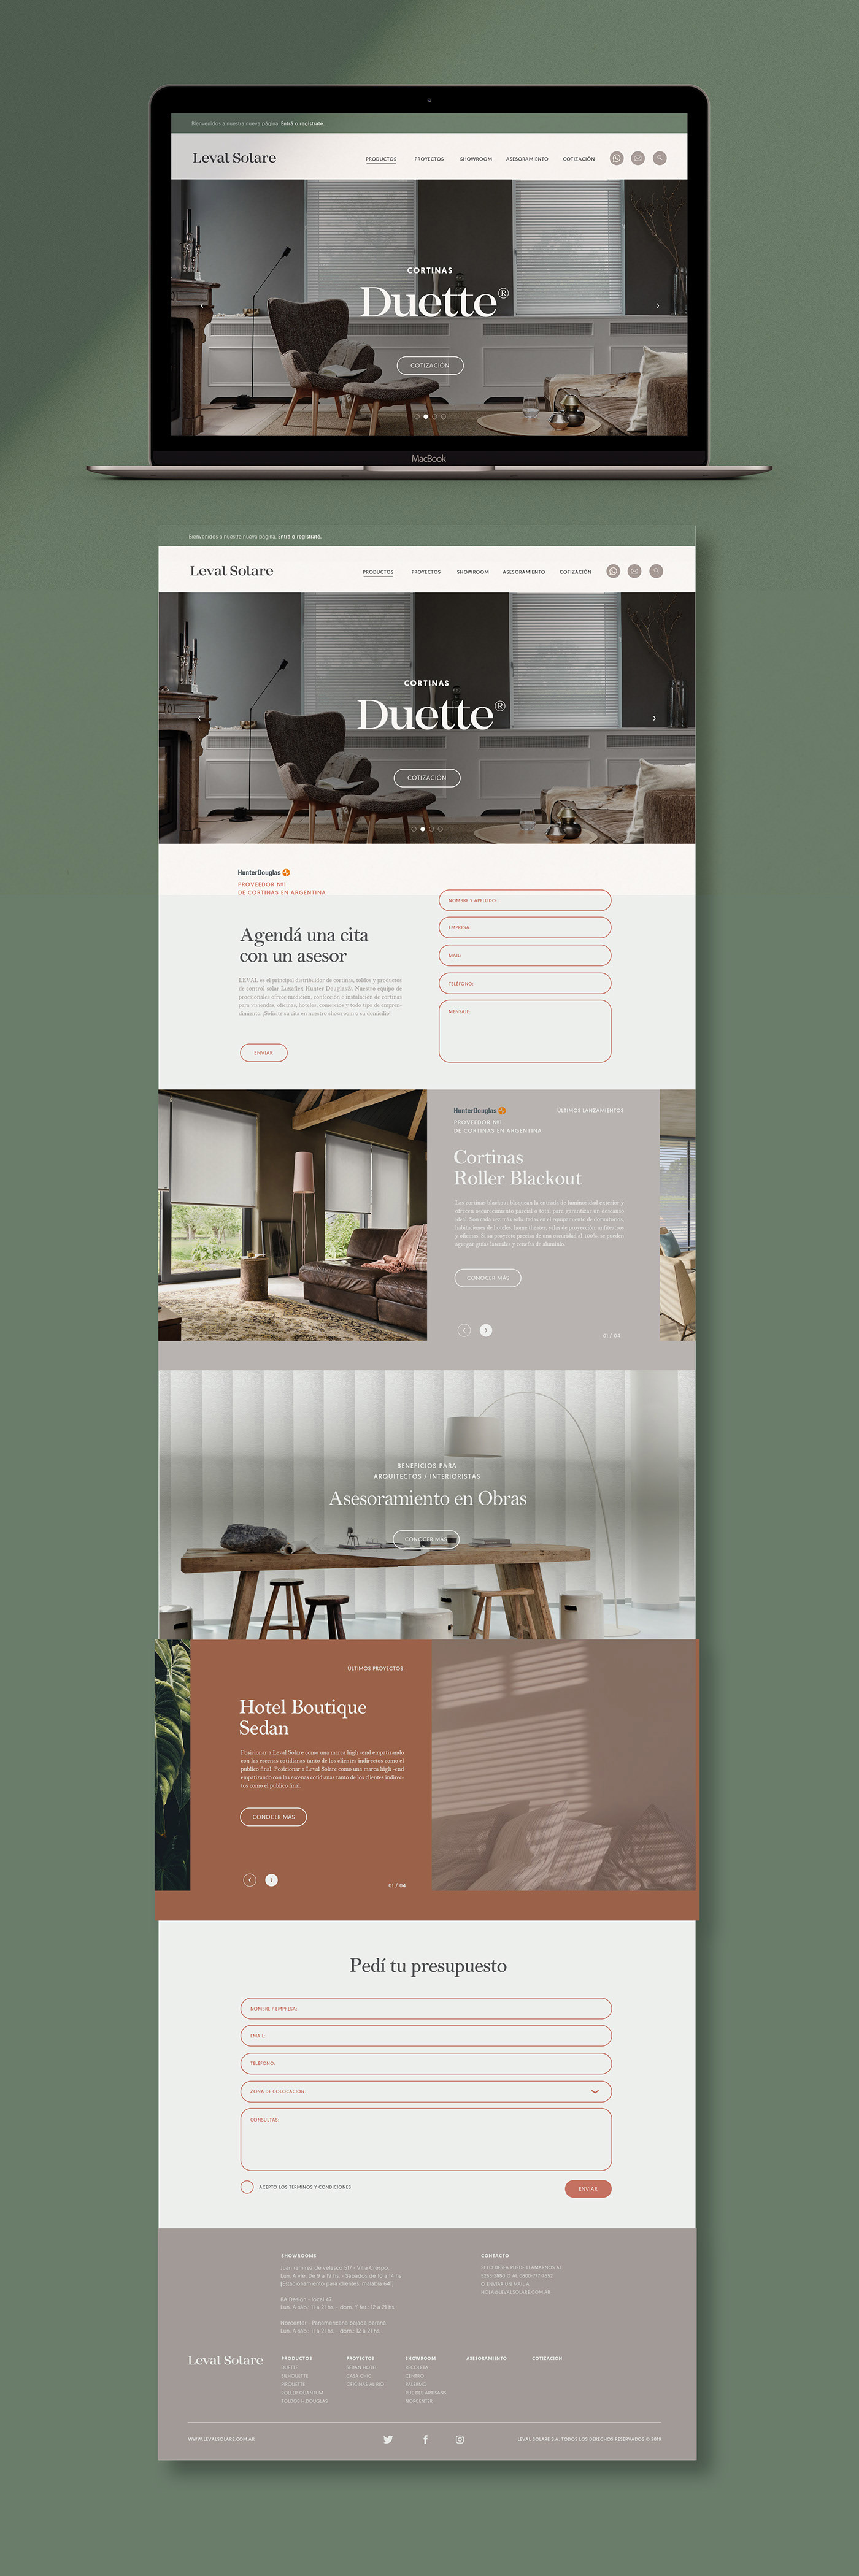 Leval Solare brand and web design by Bunker3022.